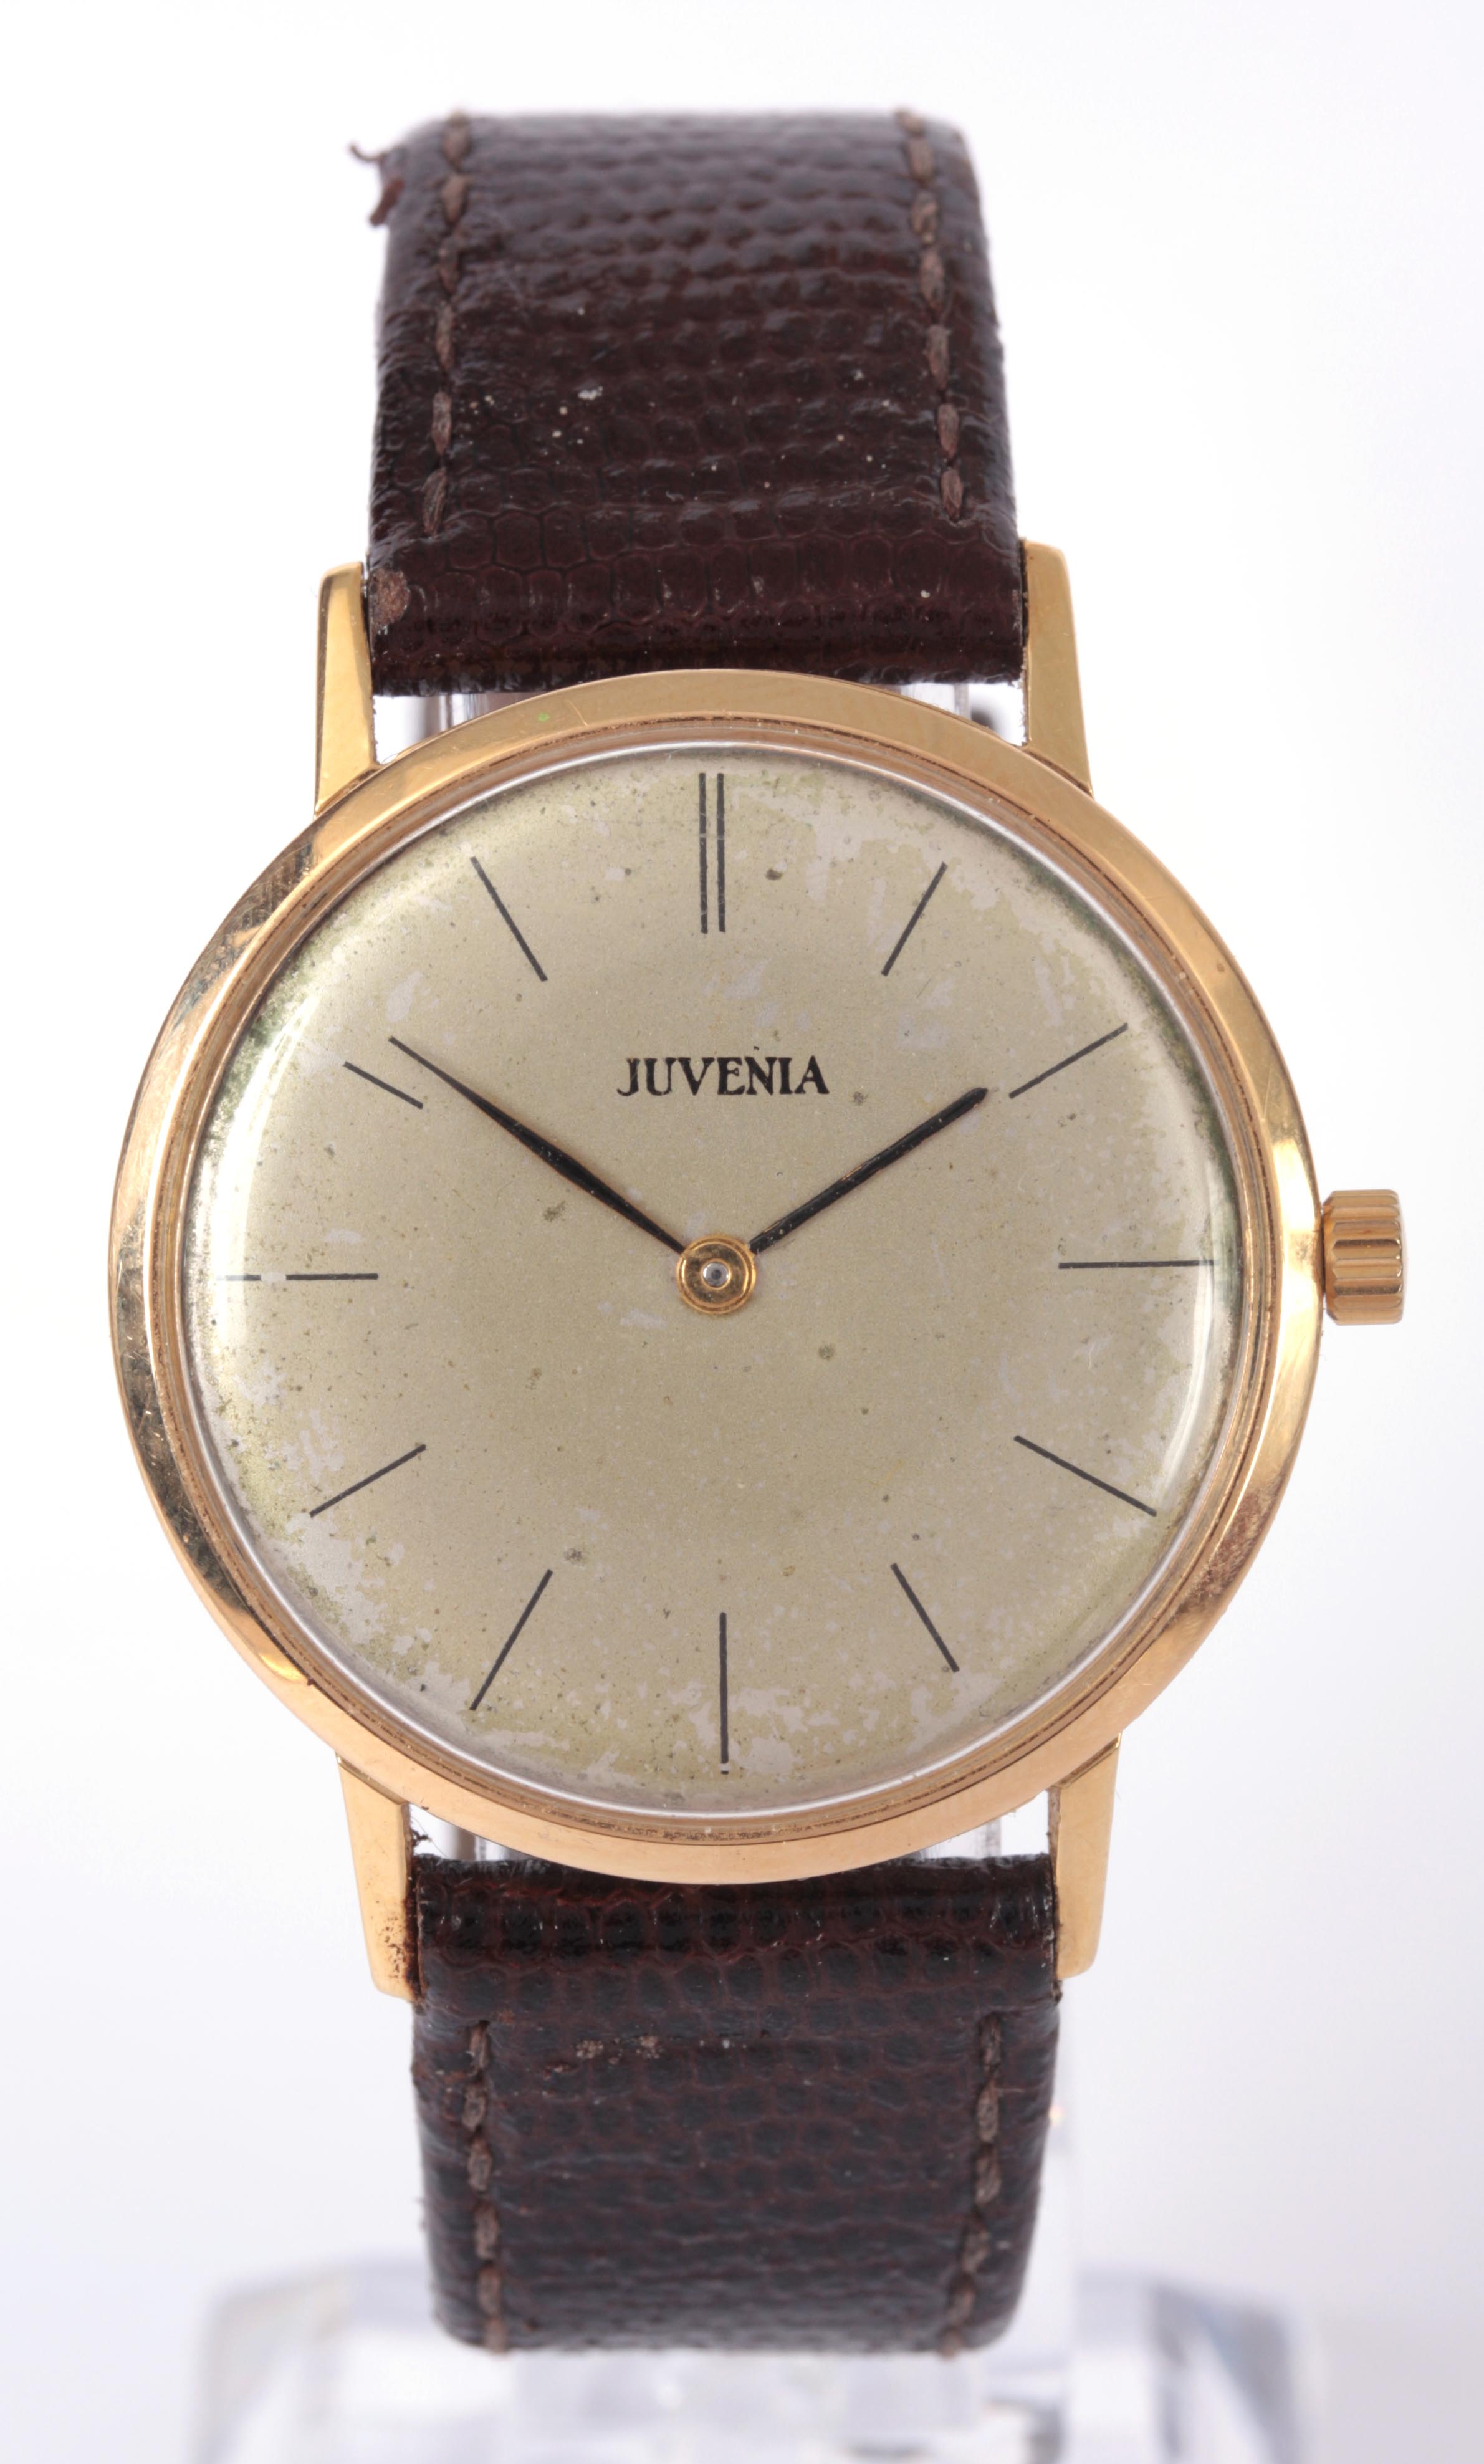 A GENTLEMAN'S 18K GOLD JUVENIA WRIST WATCH on brown leather strap, the gold case enclosing a